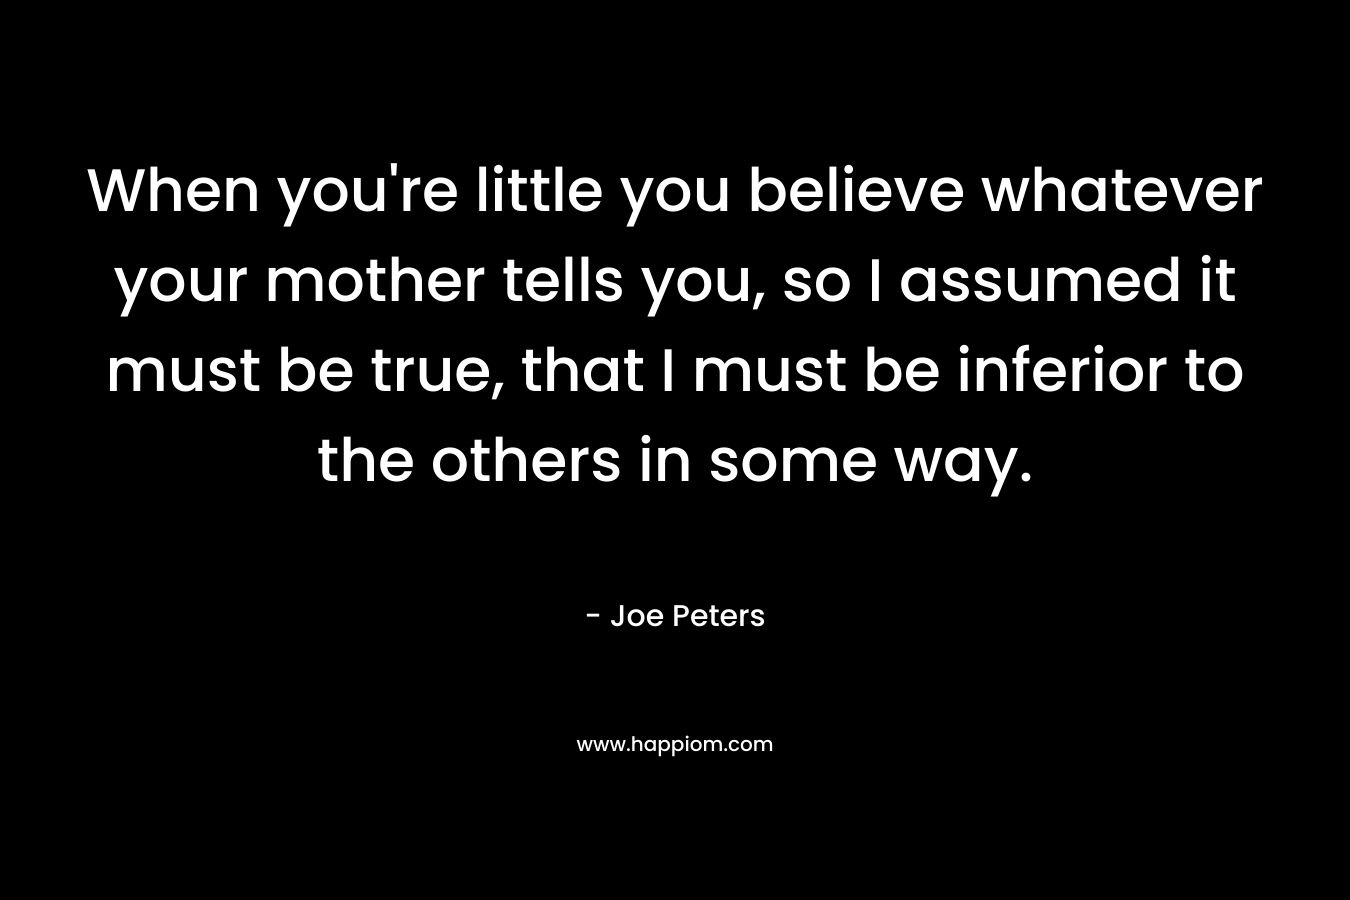 When you're little you believe whatever your mother tells you, so I assumed it must be true, that I must be inferior to the others in some way.